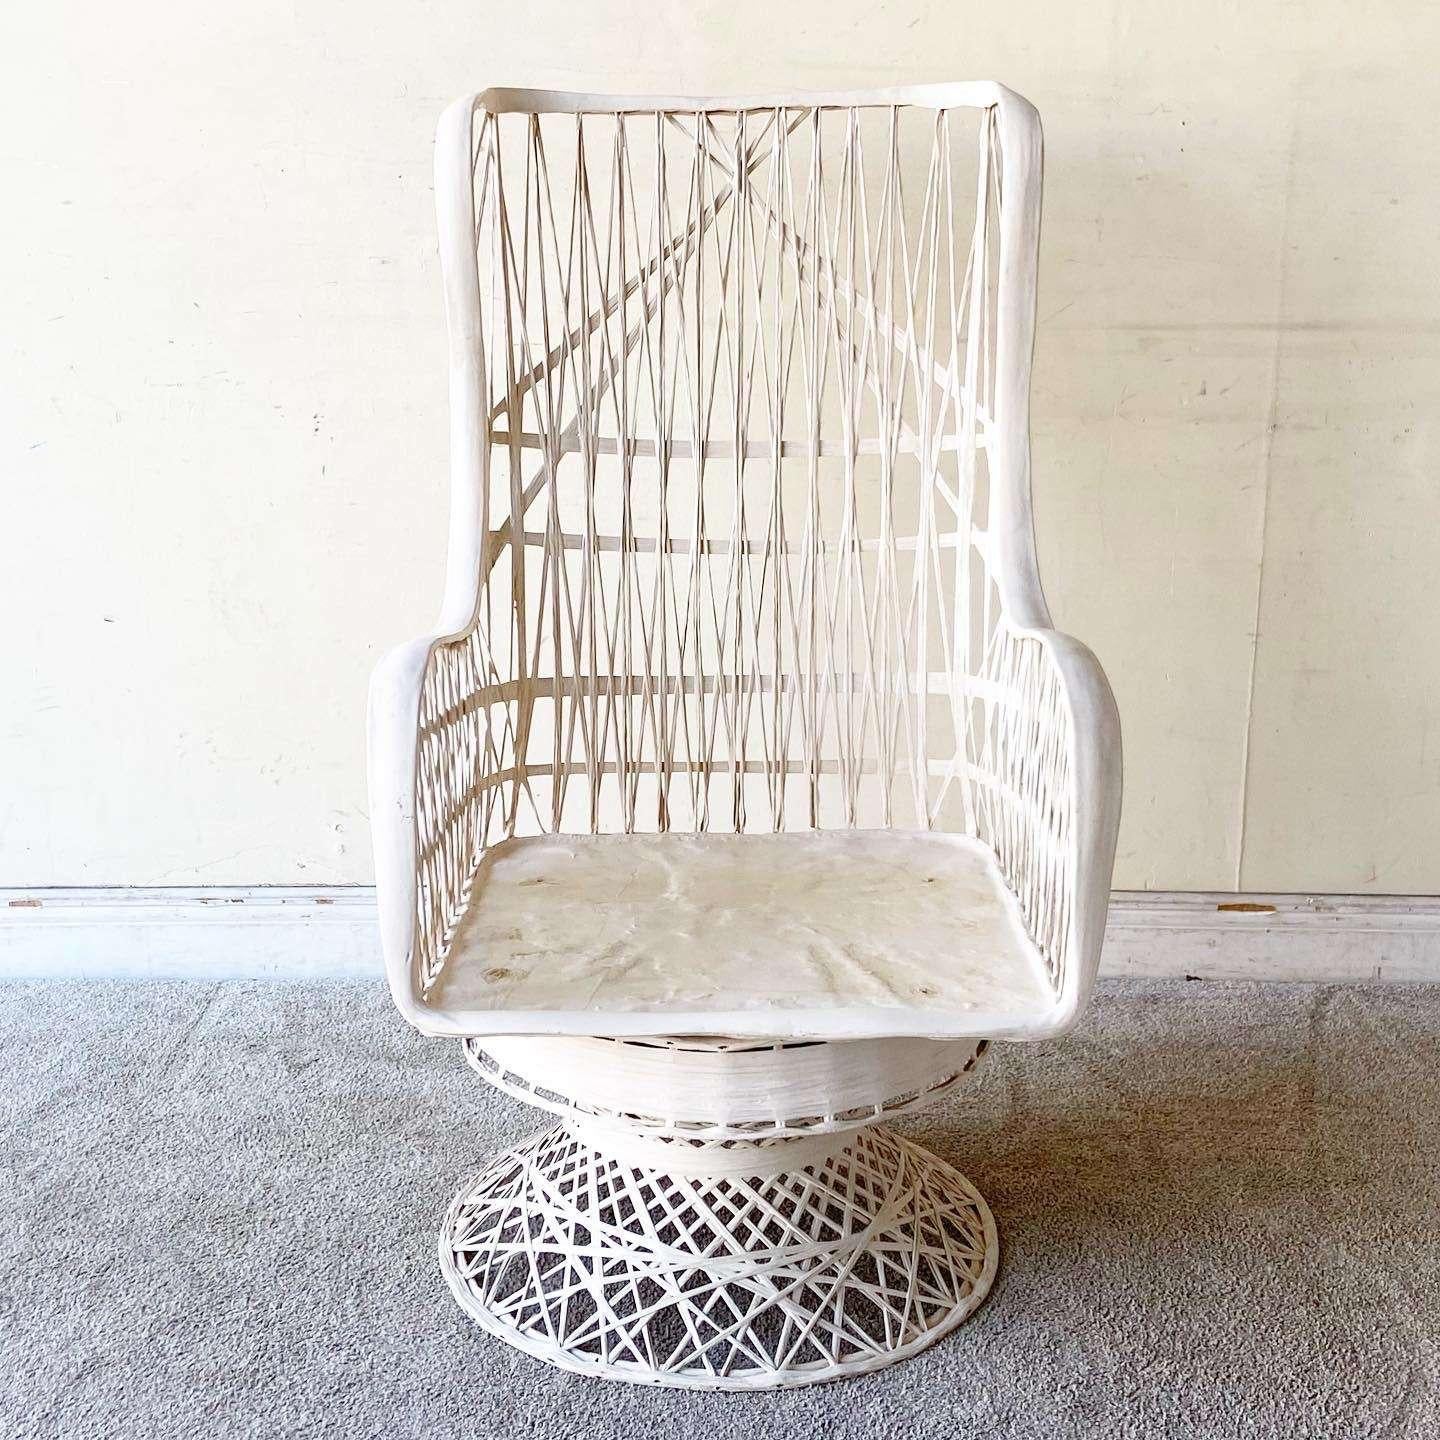 Amazing vintage mid century modern Russell Woodard spun fiberglass lounge chair with ottoman/footrest. Features a fantastic woven build with an off white finish.

Footrest dimensions:
21x21x13h

Seat height is 14.5 in